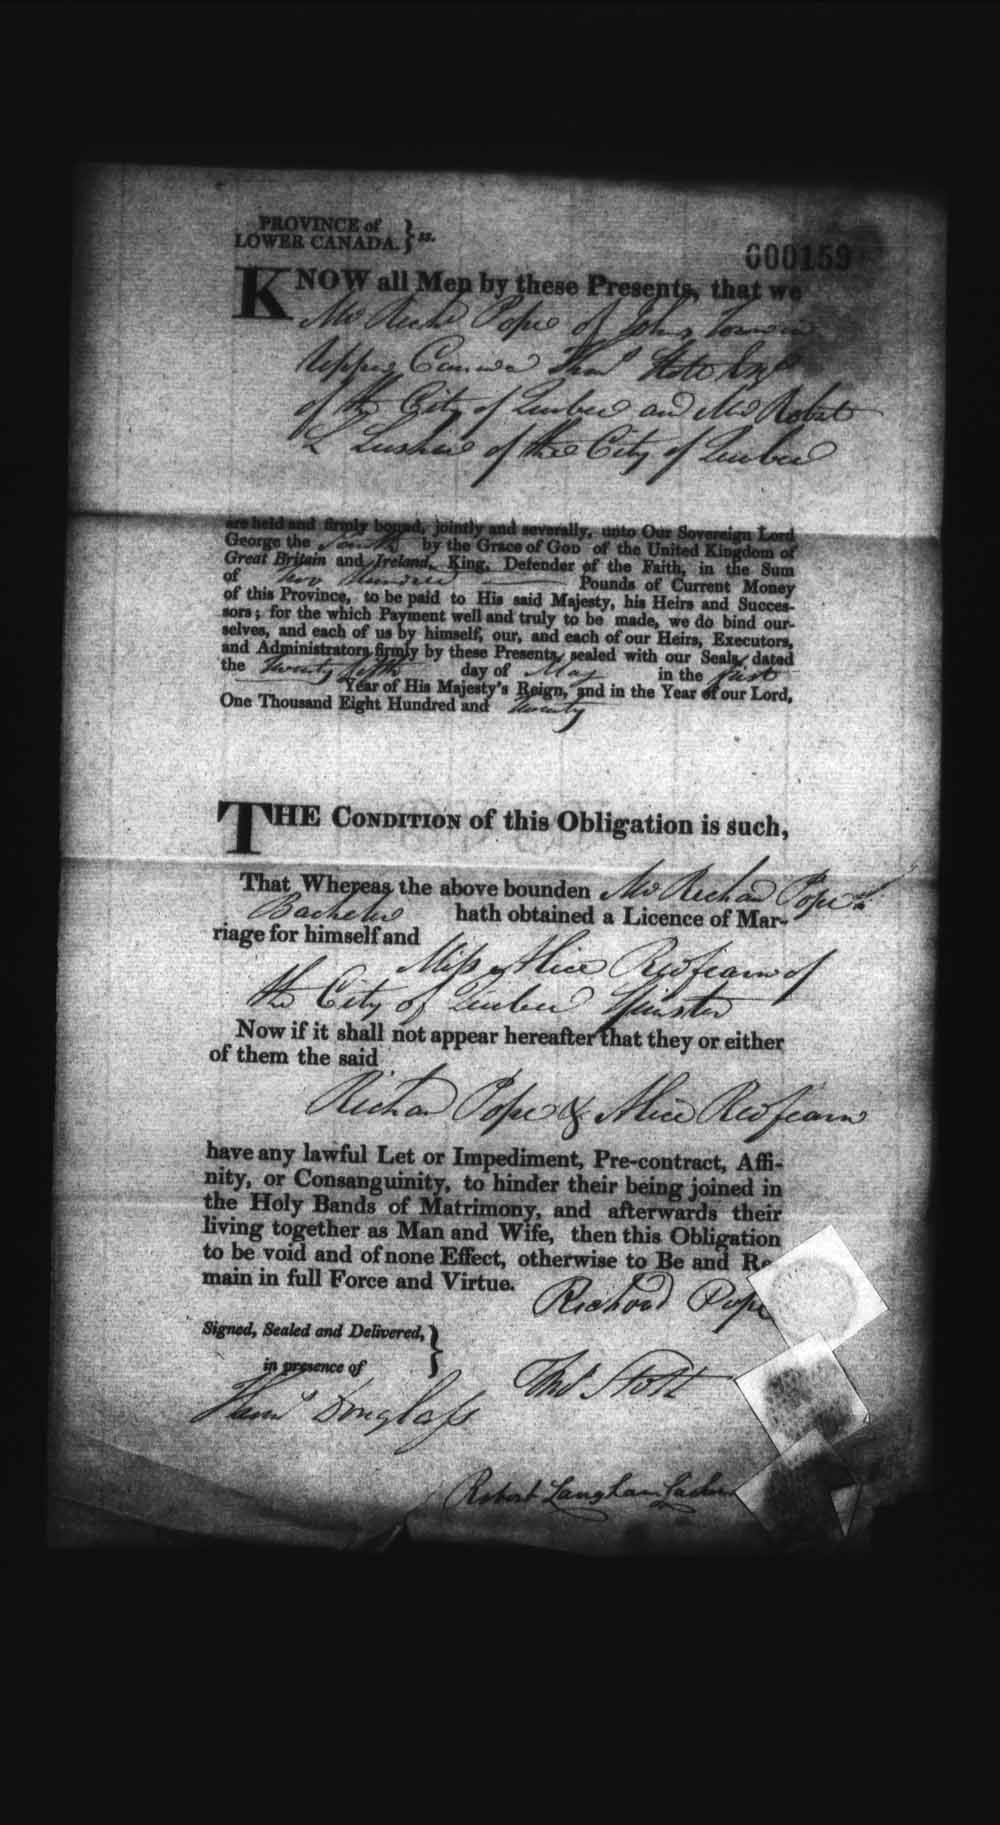 Digitized page of Upper and Lower Canada Marriage Bonds (1779-1865) for Image No.: e008236002